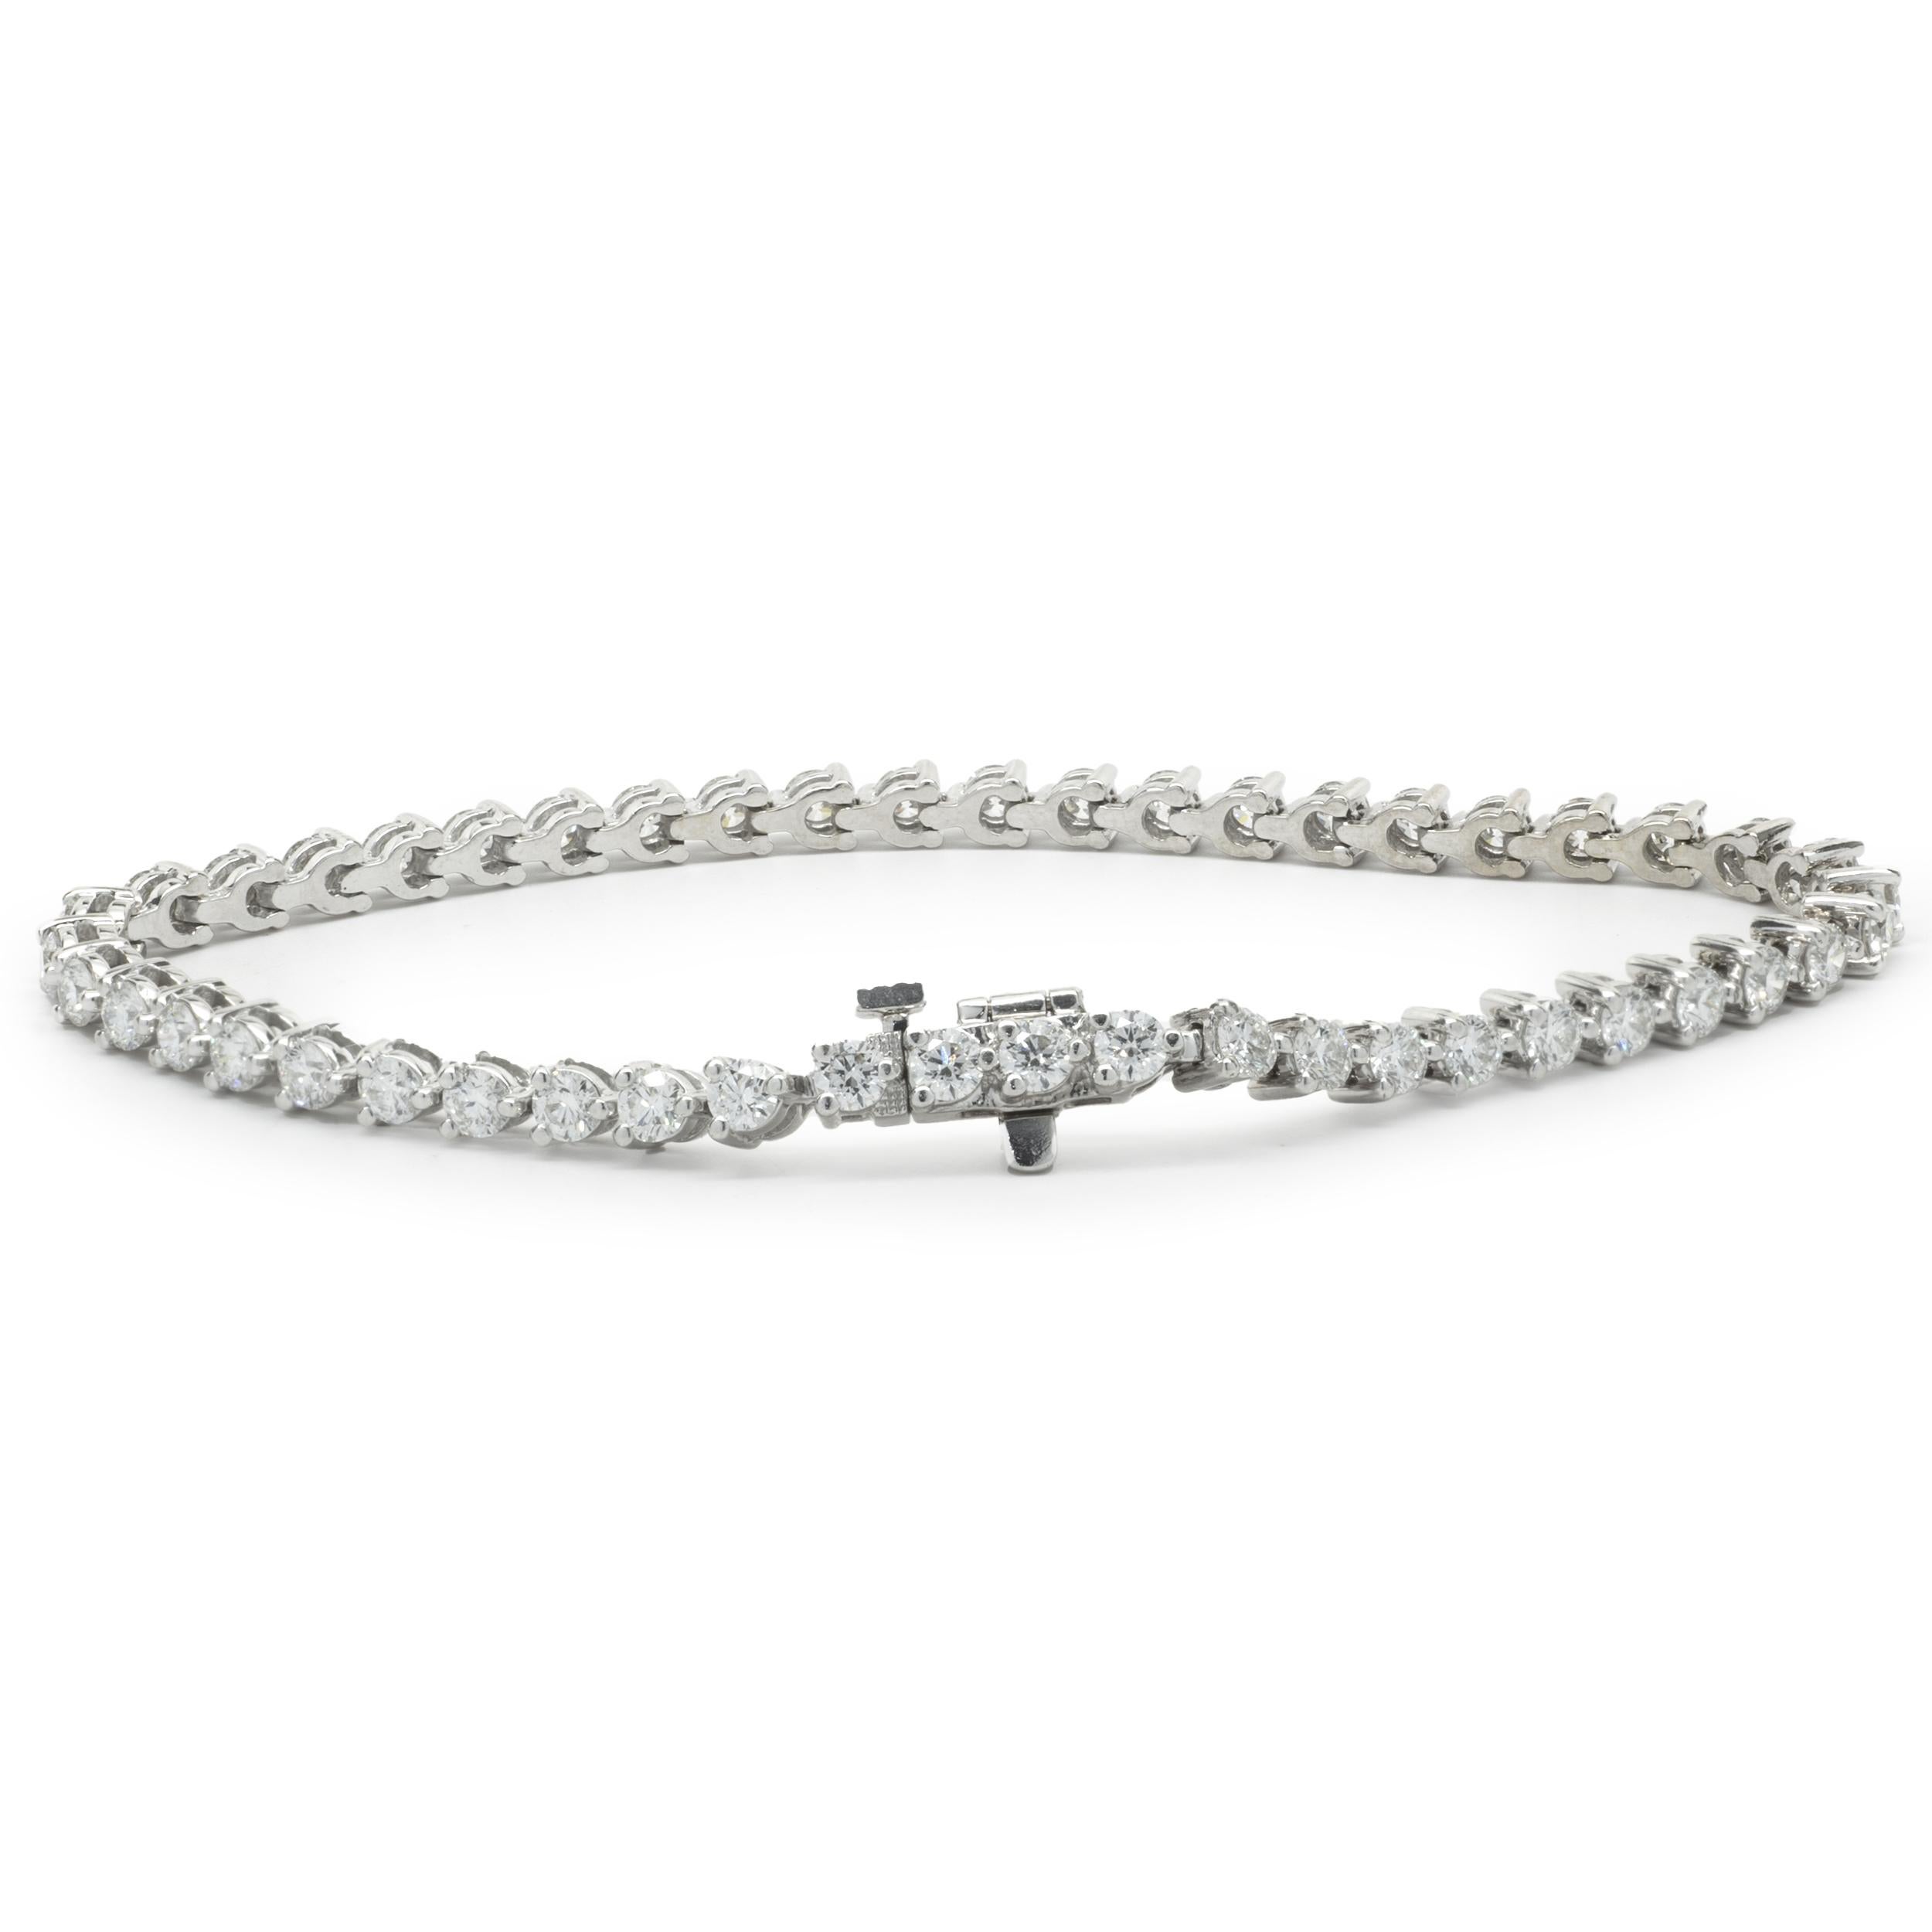 Designer: custom
Material: 14K white gold
Diamond: 48 round brilliant cut = 3.36cttw
Color: H
Clarity: VS2
Dimensions: bracelet will fit up to a 7-inch wrist
Weight: 10.15 grams
